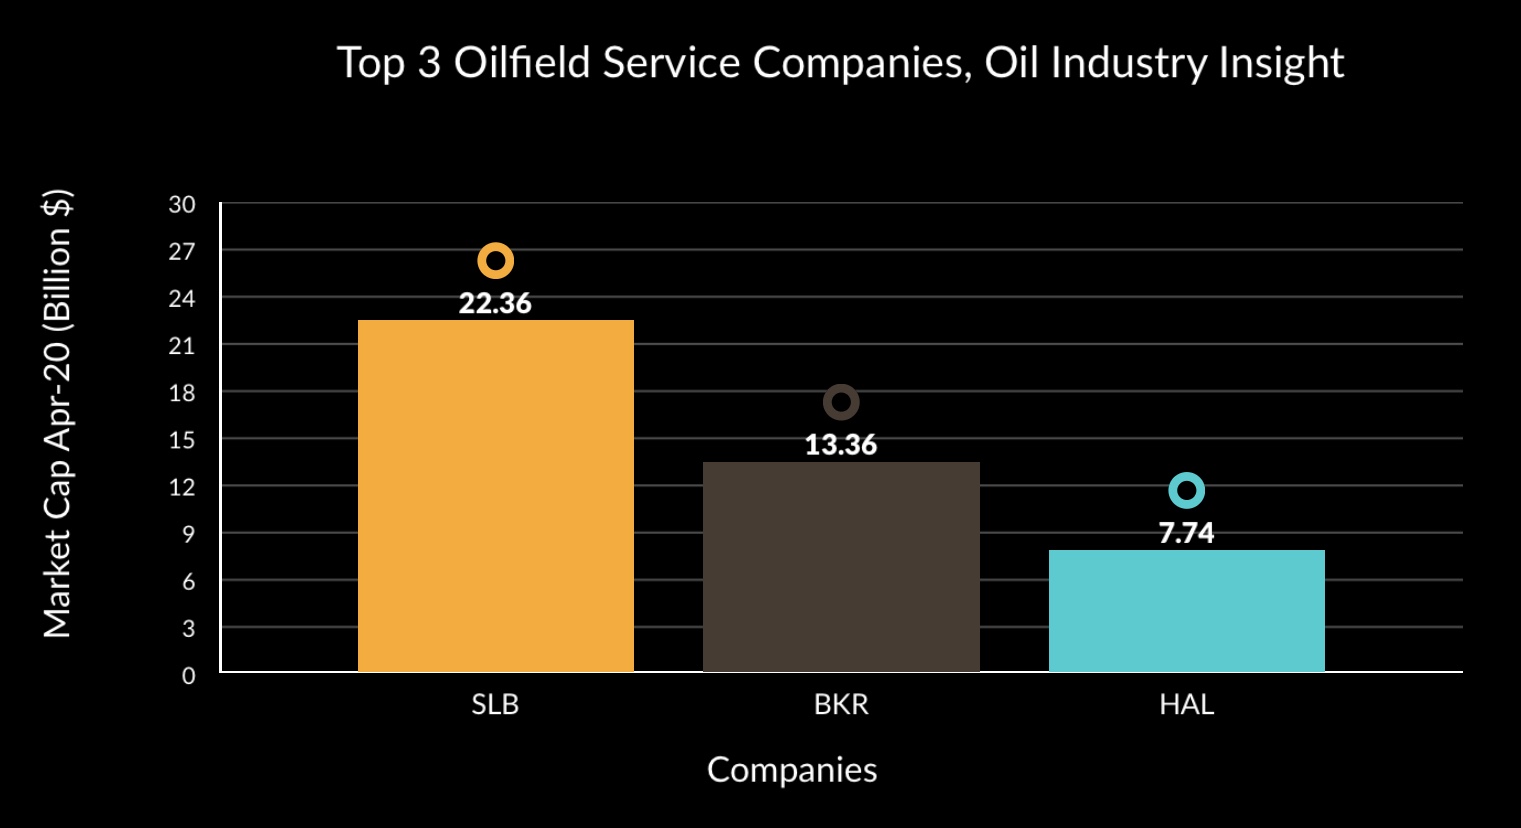 The World Top 3 Oilfield Service Companies 2020 based on Market Capitalisation - April 2020, Source: Oil Industry Insight 